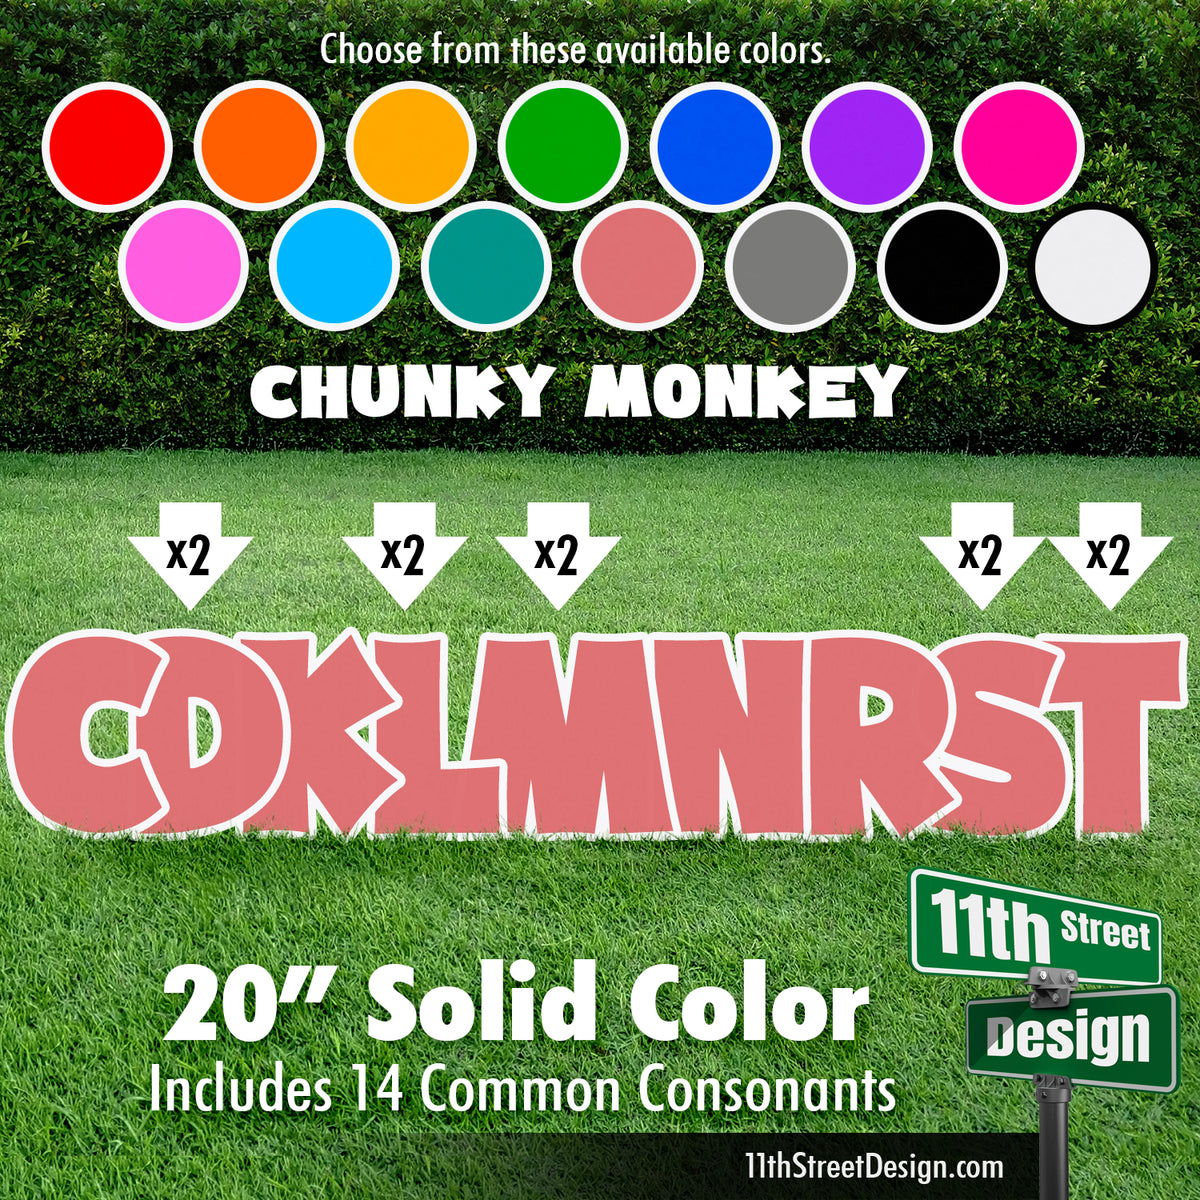 Solid Color 20&quot; Chunky Monkey Yard Card Set Includes 14 Common Consonants